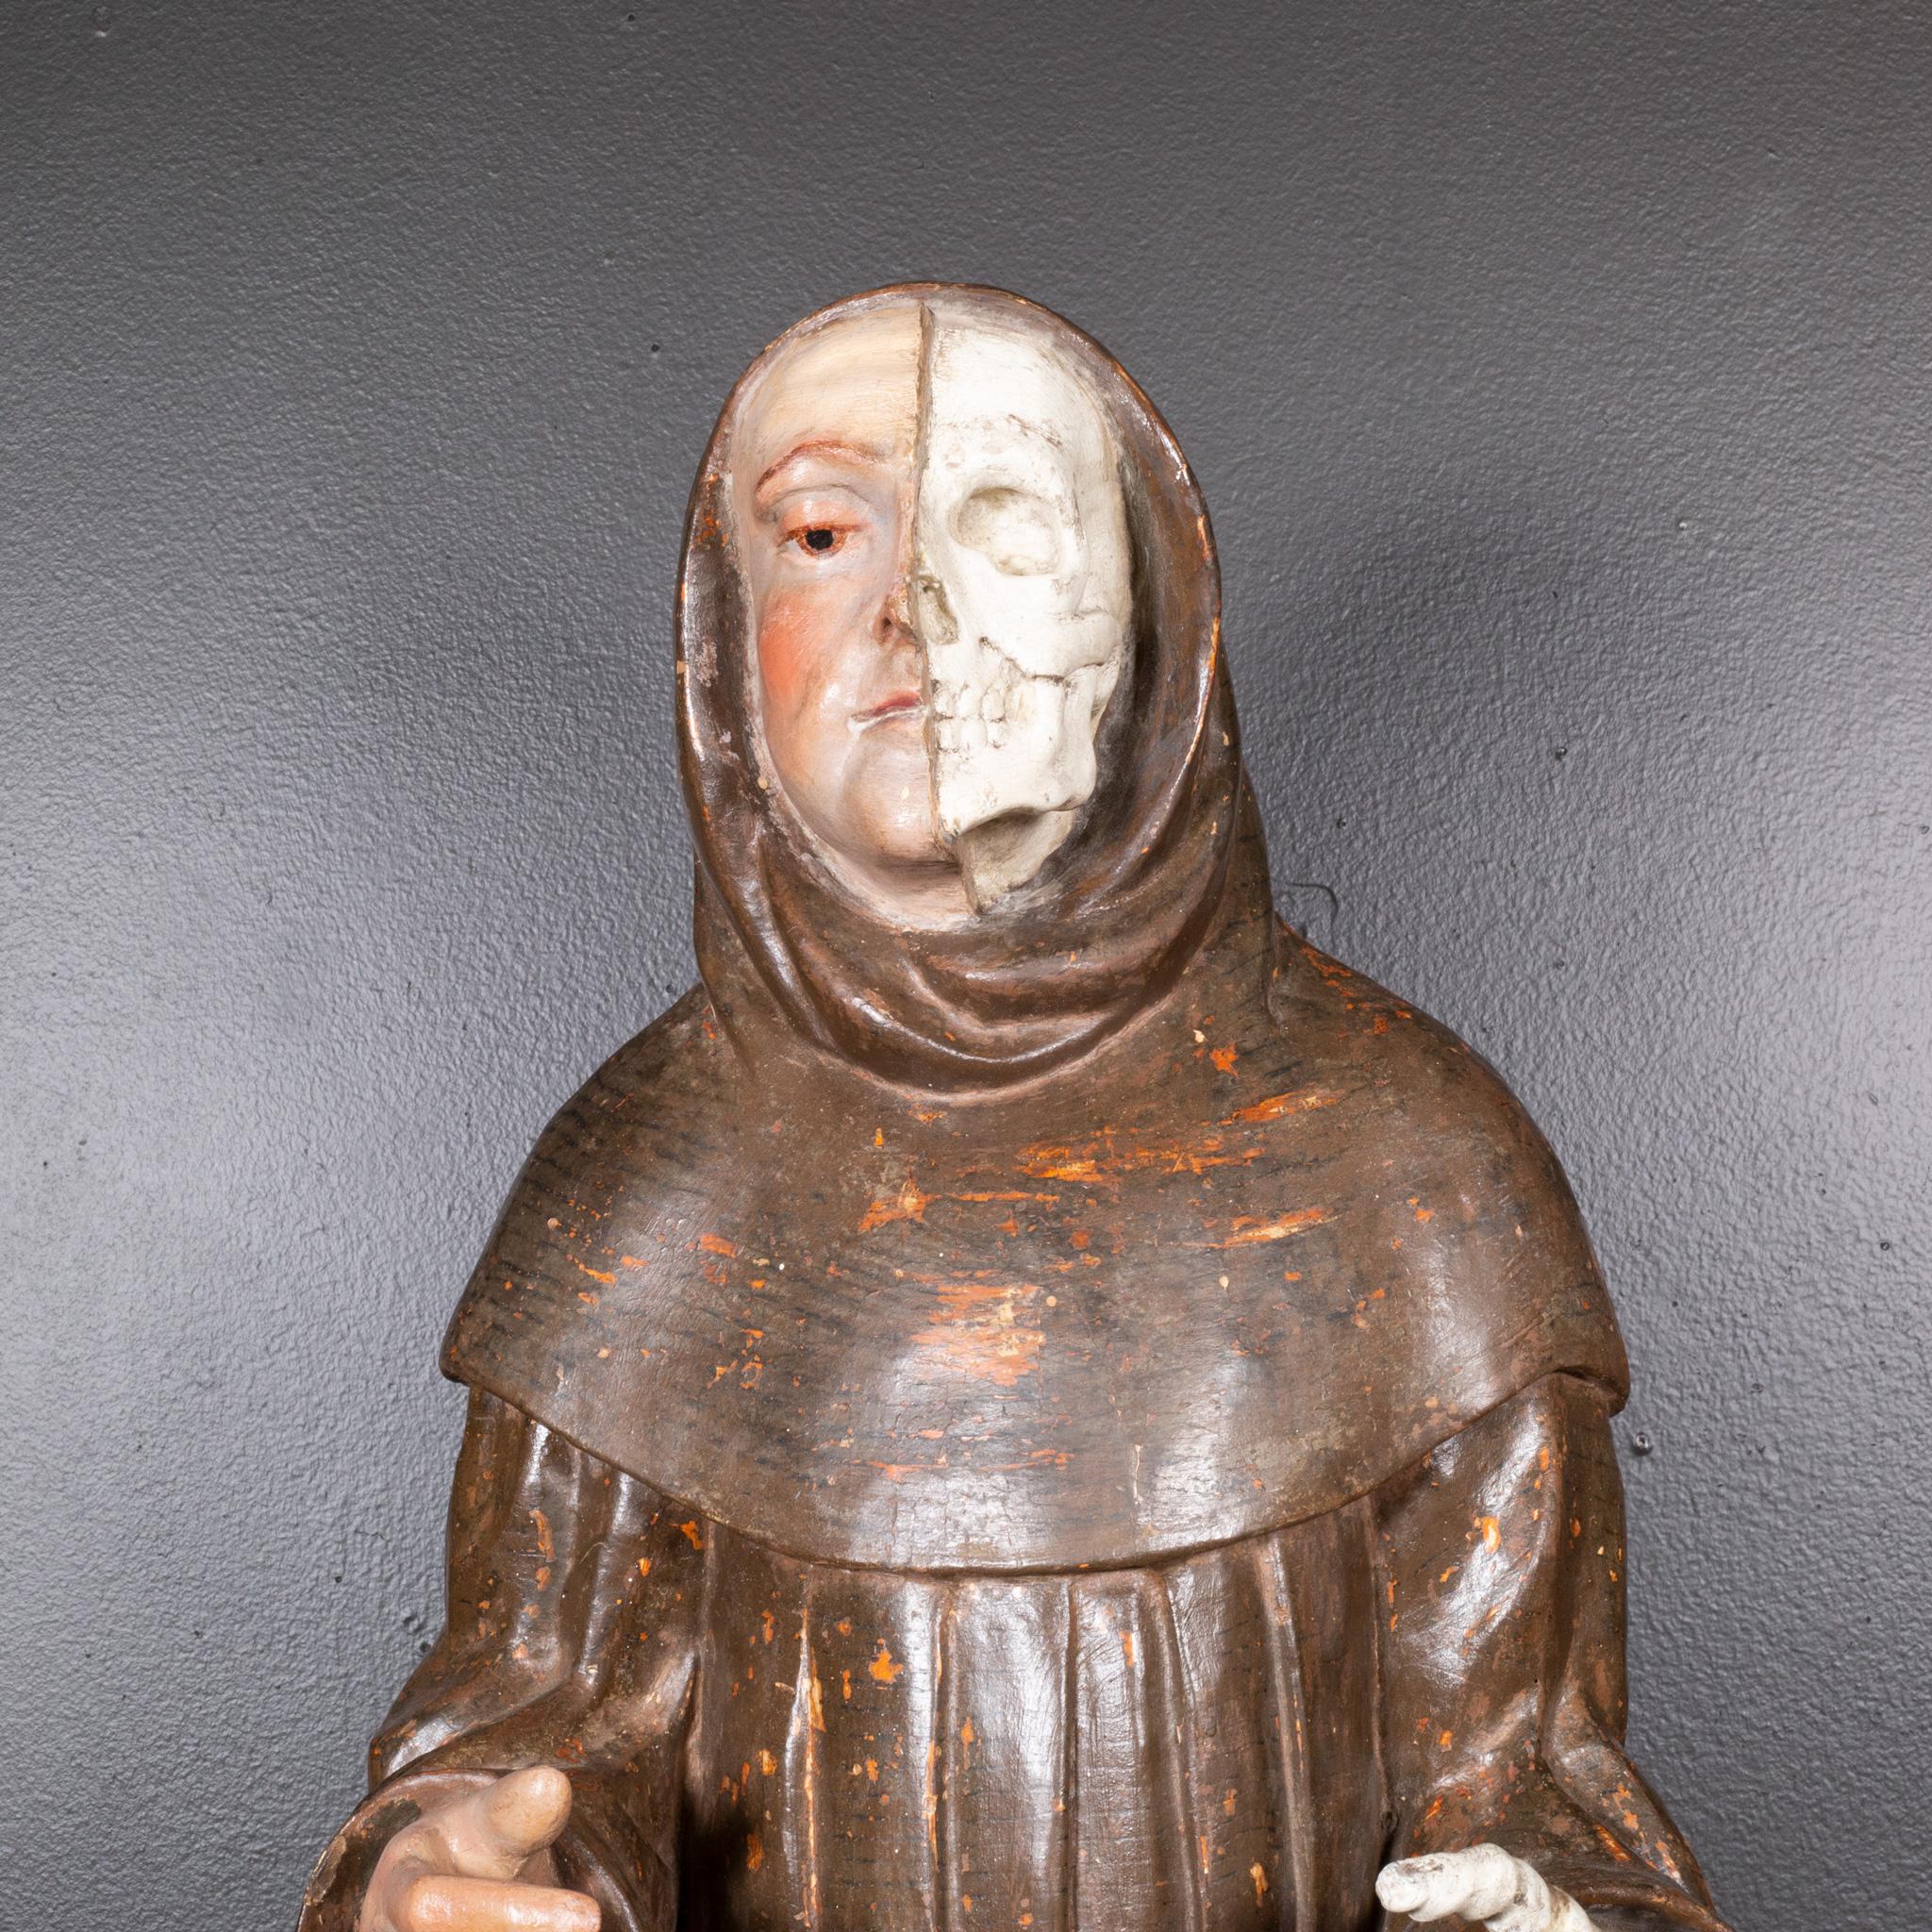 ABOUT

Contact us for more shipping options. Free Bay Area delivery. S16 Home San Francisco. 

Exceptional large Memento Mori sculpture in polychrome depicting a half flayed Monk. German 17th century. The sculpture presents half of the skeletal